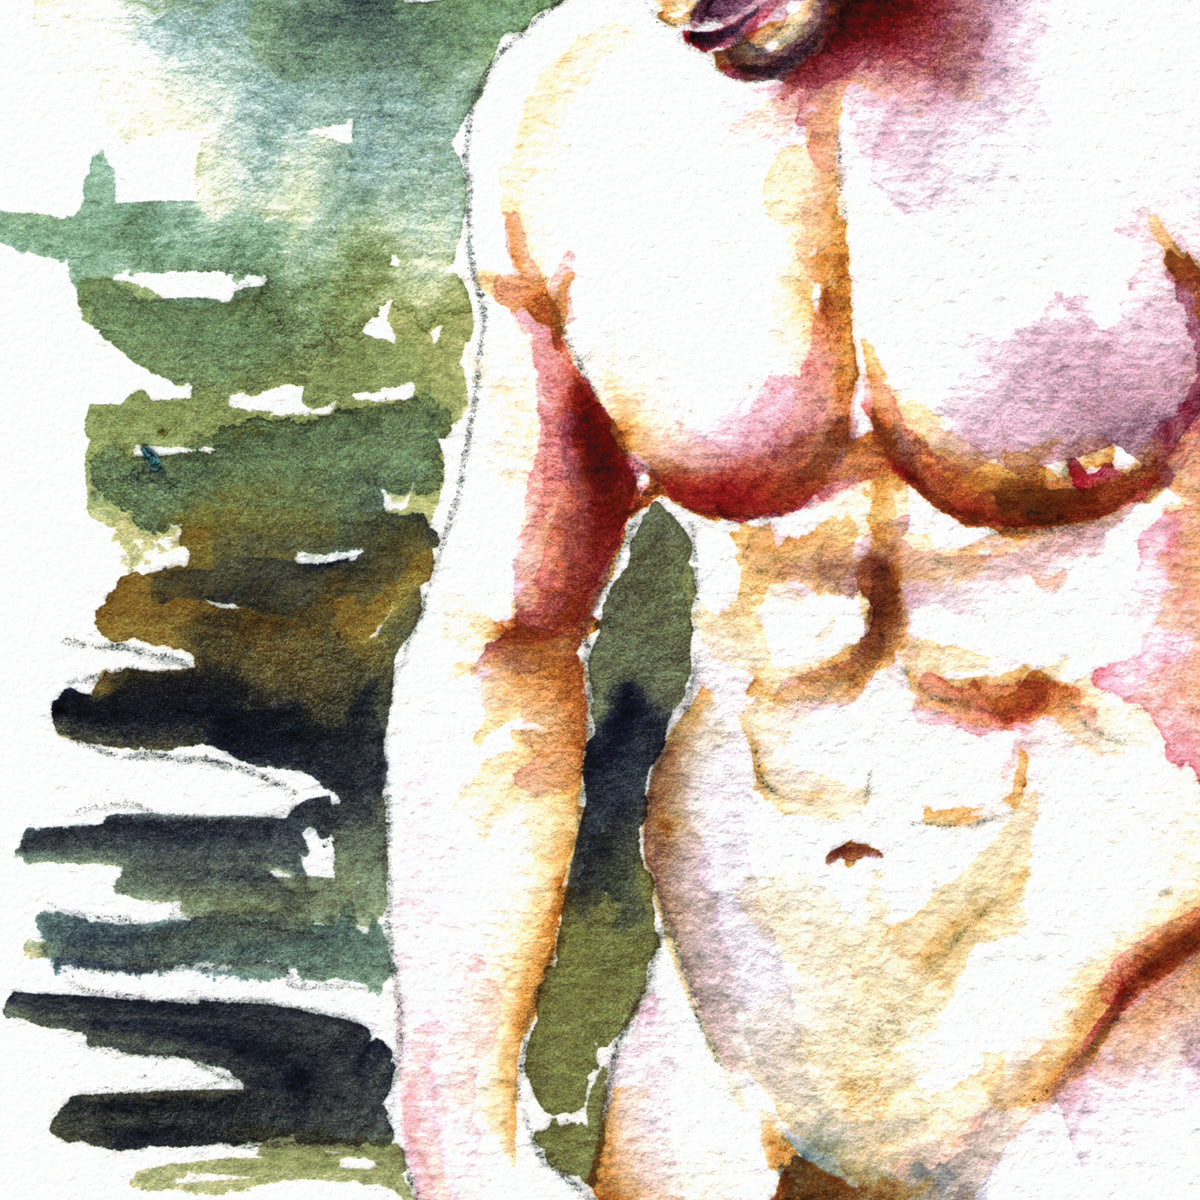 Rippled Reflections: Muscular Man at Water's Edge - Giclee Art Print